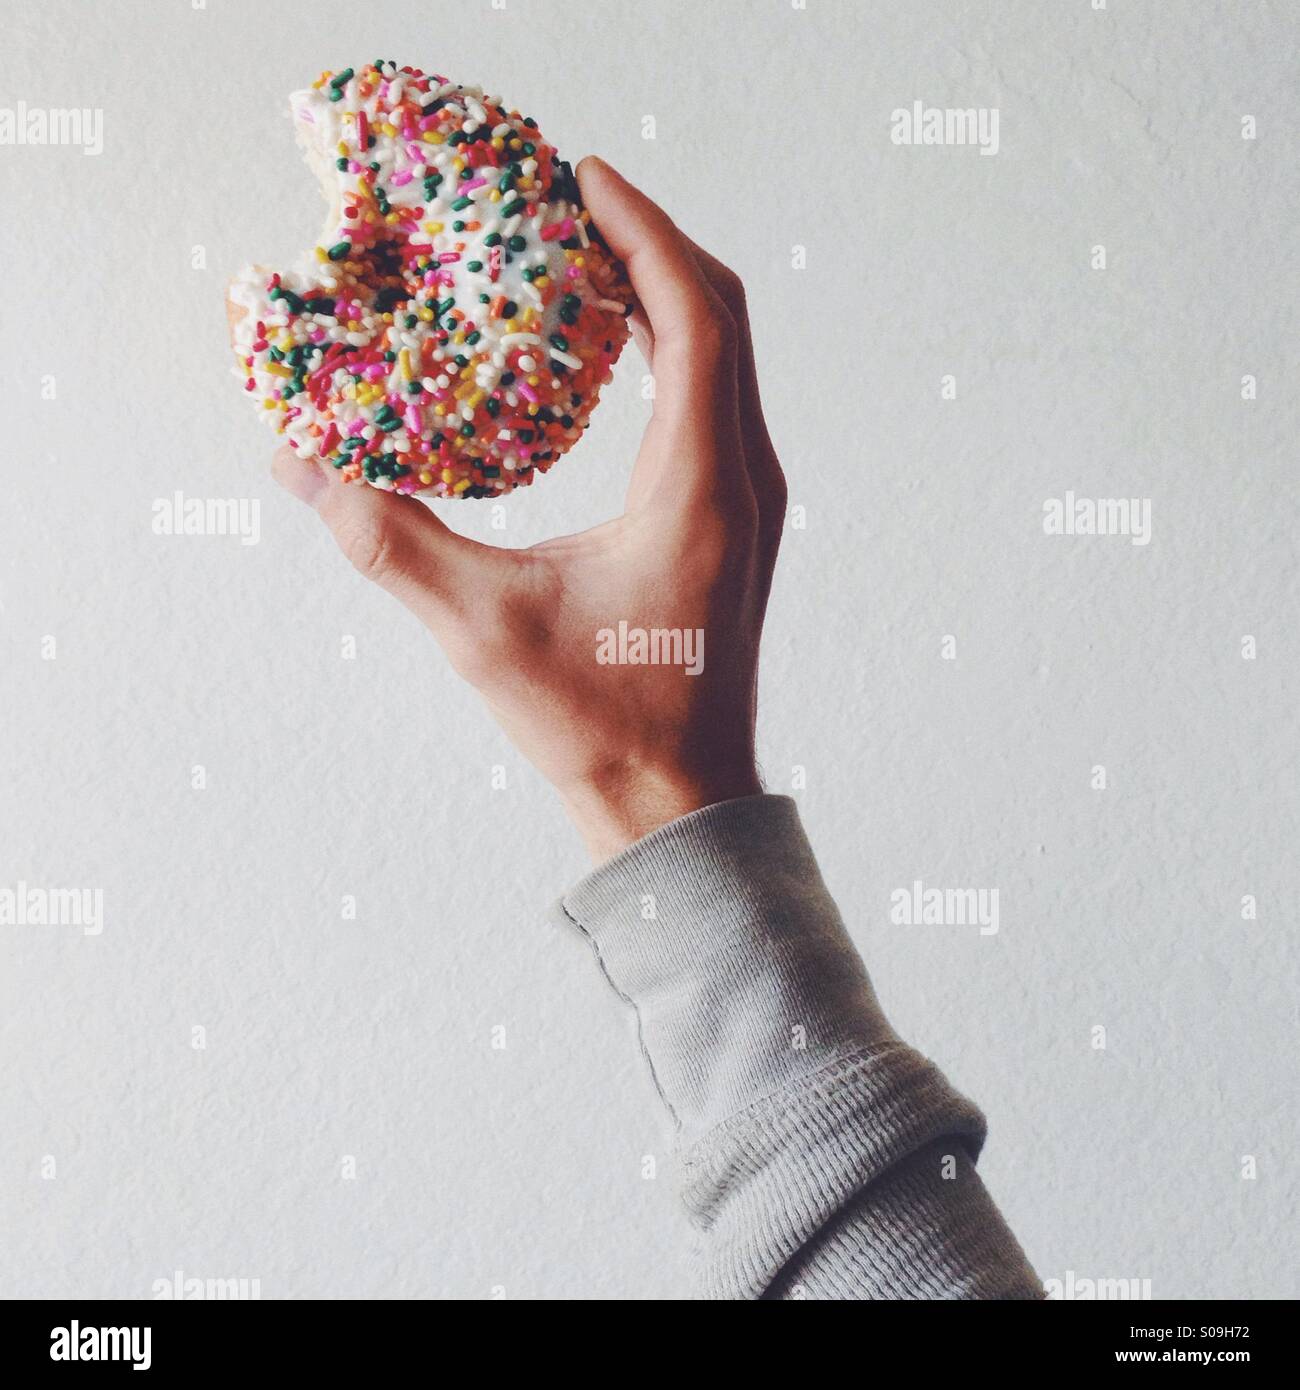 Holding a donut with sprinkles Stock Photo